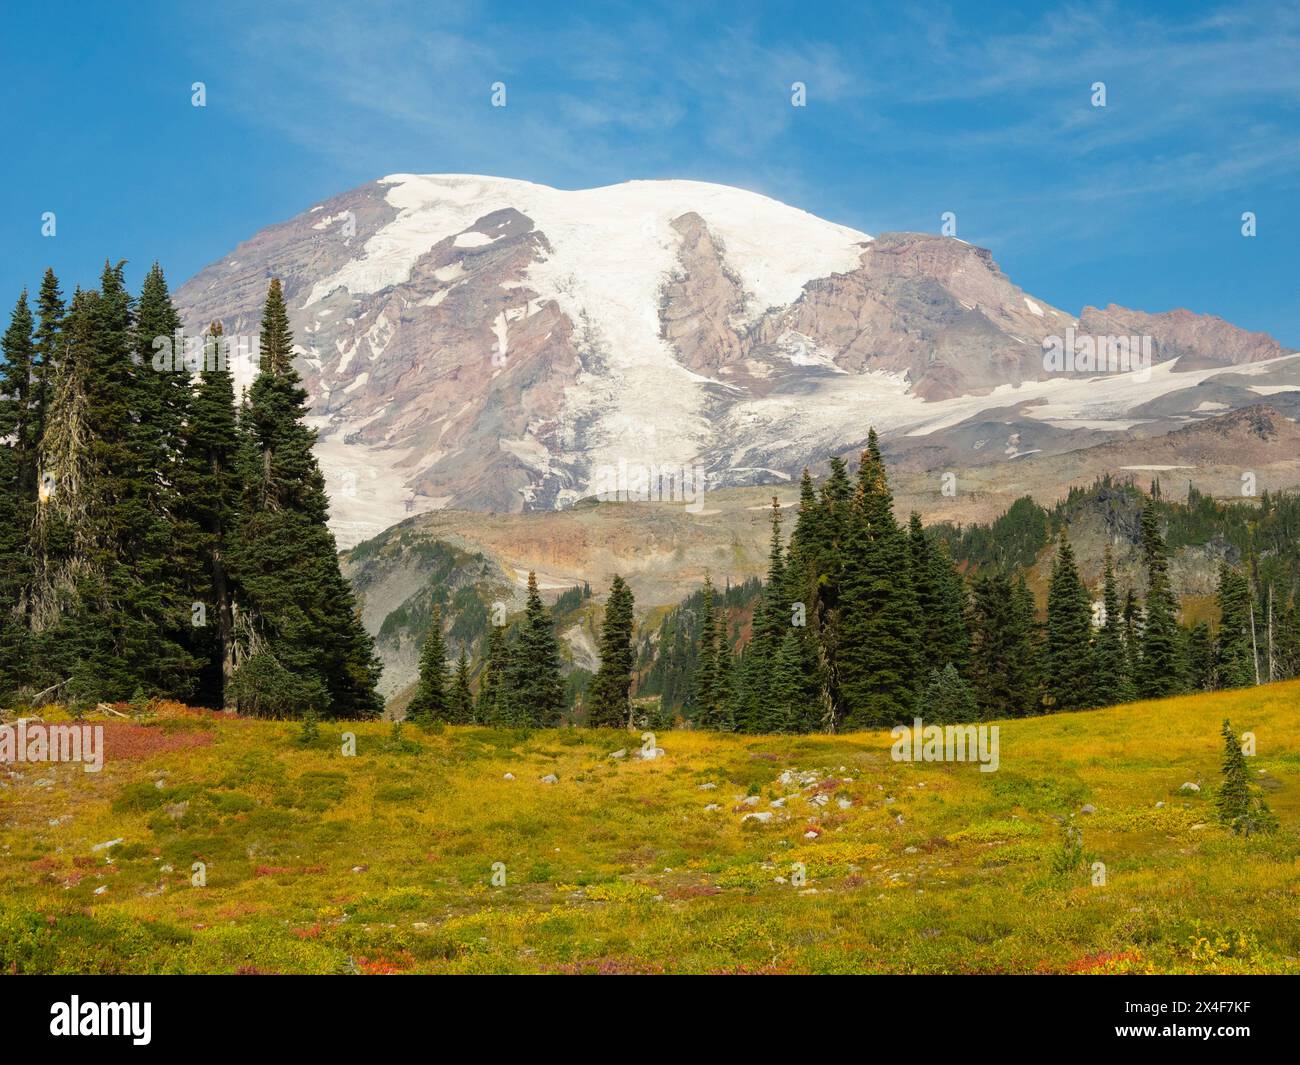 USA, Washington State, Mount Rainier National Park. Snow-capped Mount Rainier with meadow in fall color Stock Photo